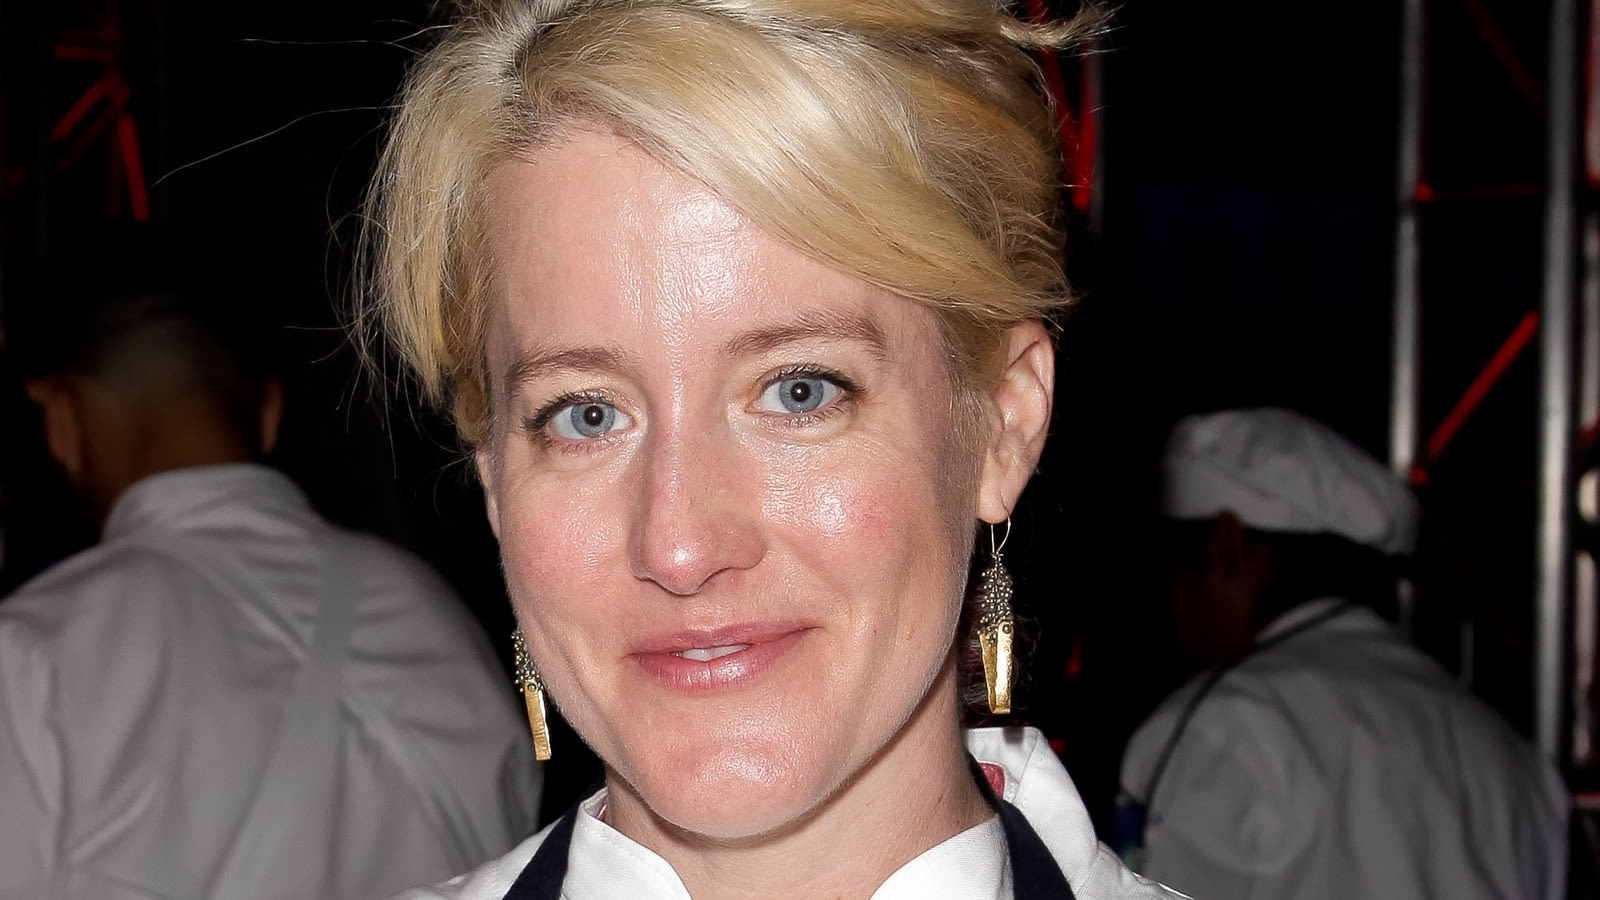 Top Chef Star Naomi Pomeroy Dead At 49